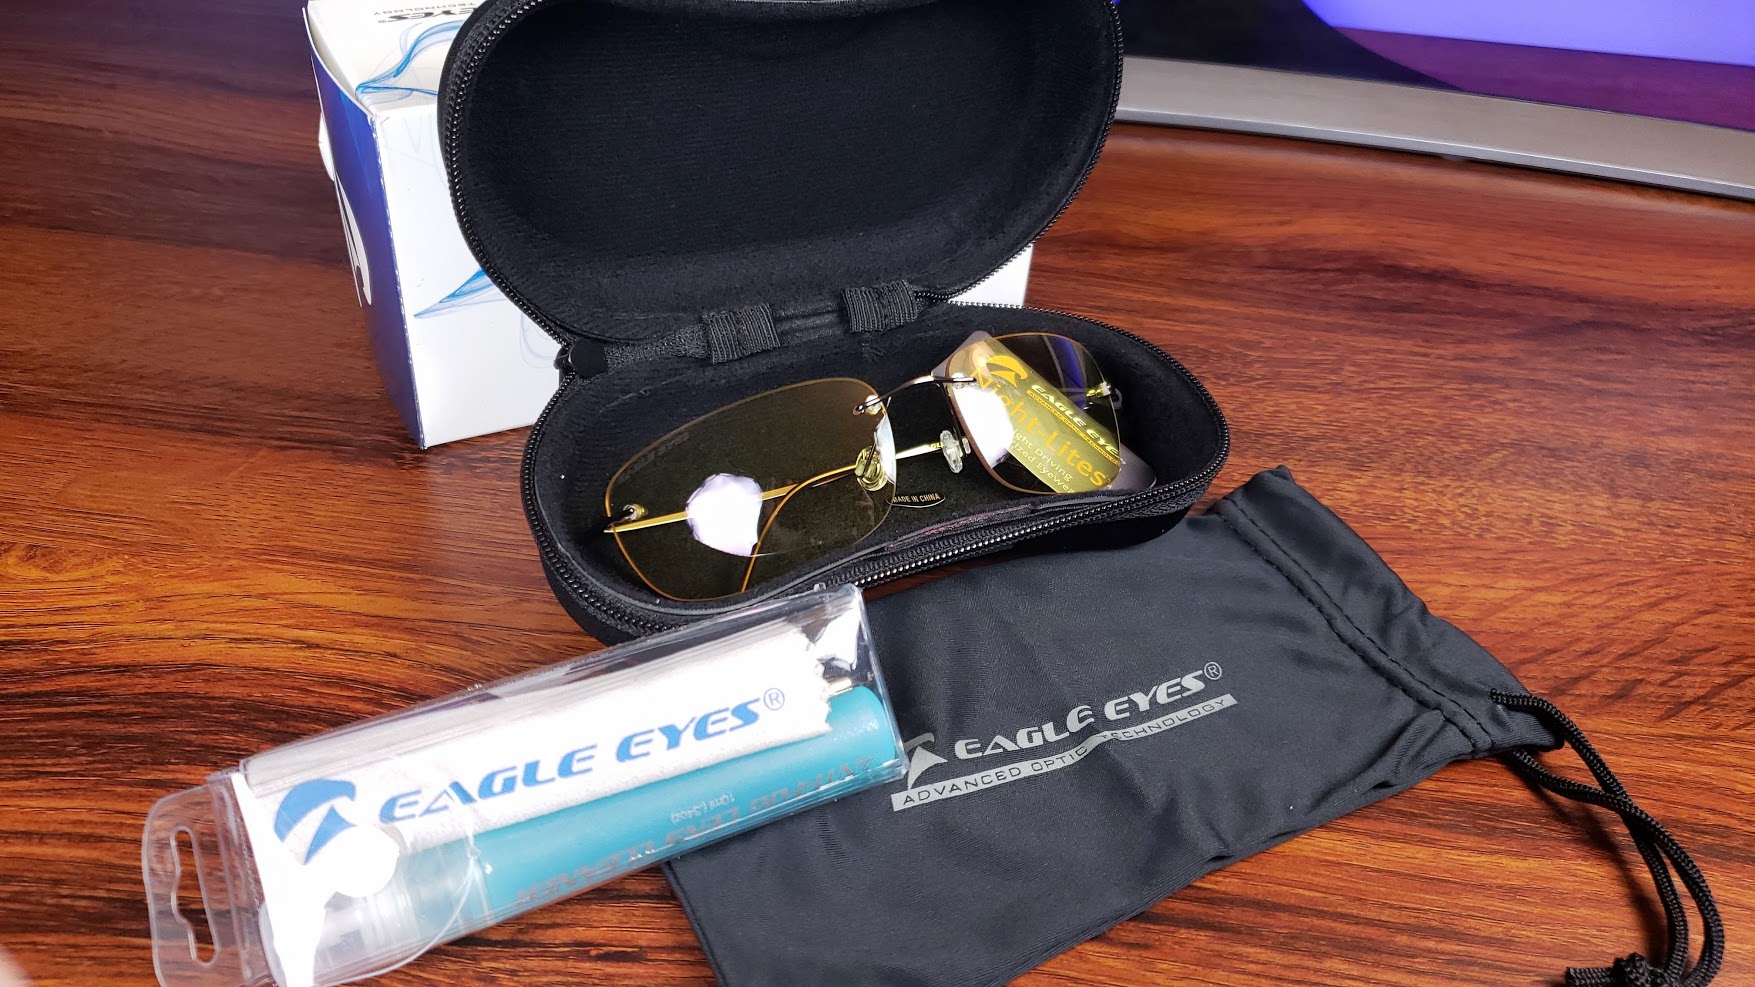 Eagle Eyes Nighttime Driving Glasses Review